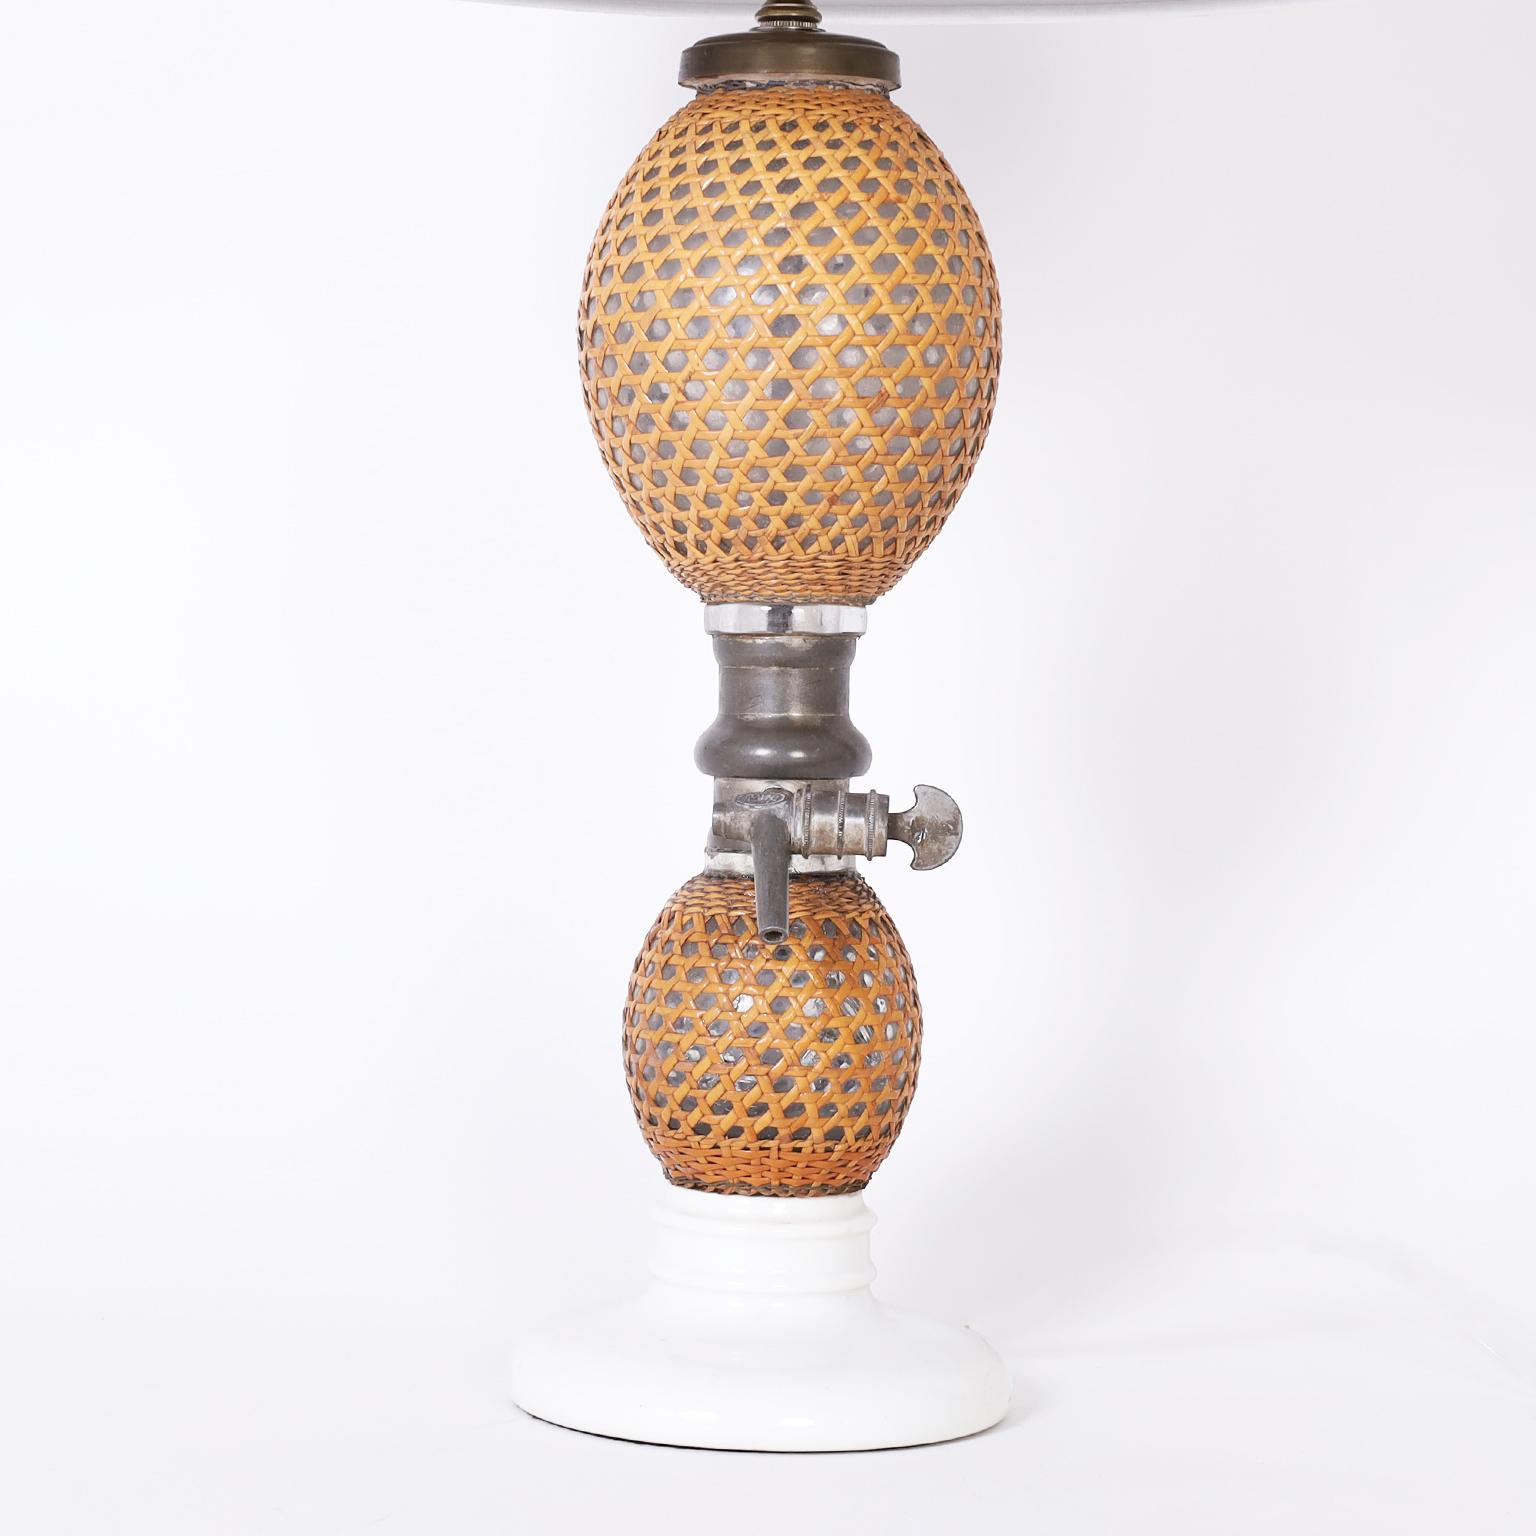 20th Century Pair of Antique French Wicker and Glass Seltzer Bottle Table Lamps